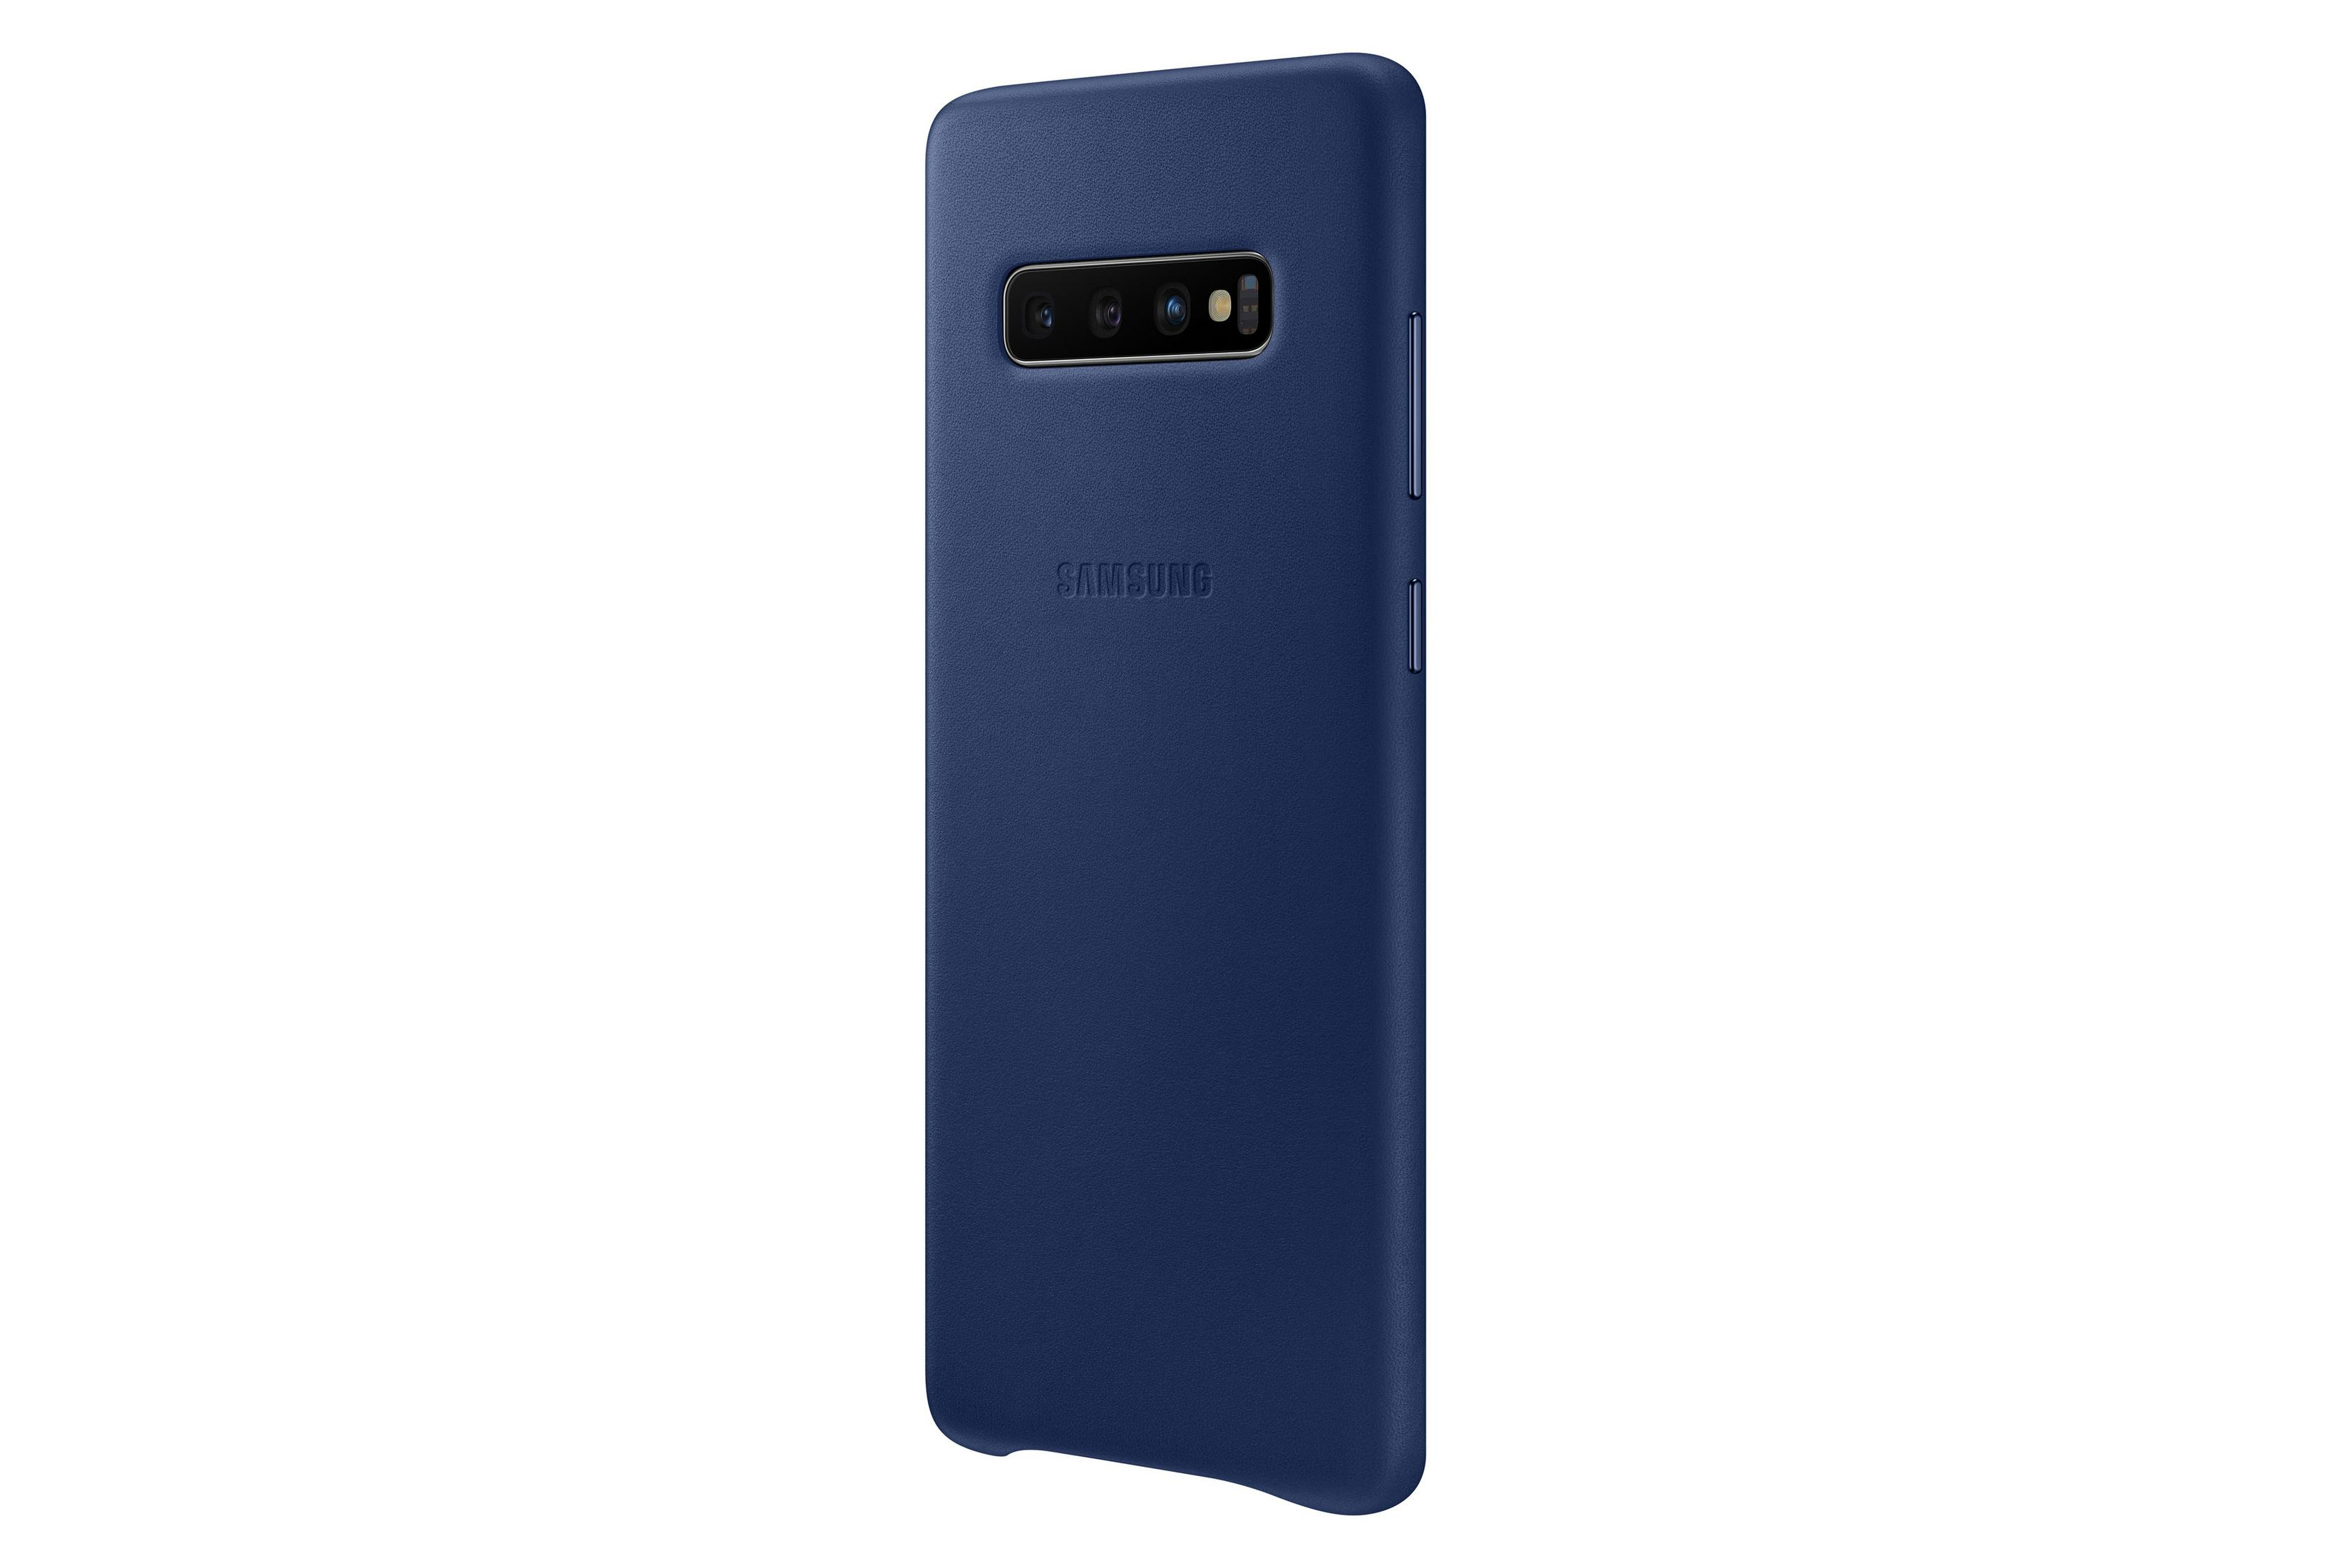 Galaxy LEATHER NAVY, Samsung, Backcover, EF-VG975LNEGWW Navy COVER S10+, S10+ SAMSUNG